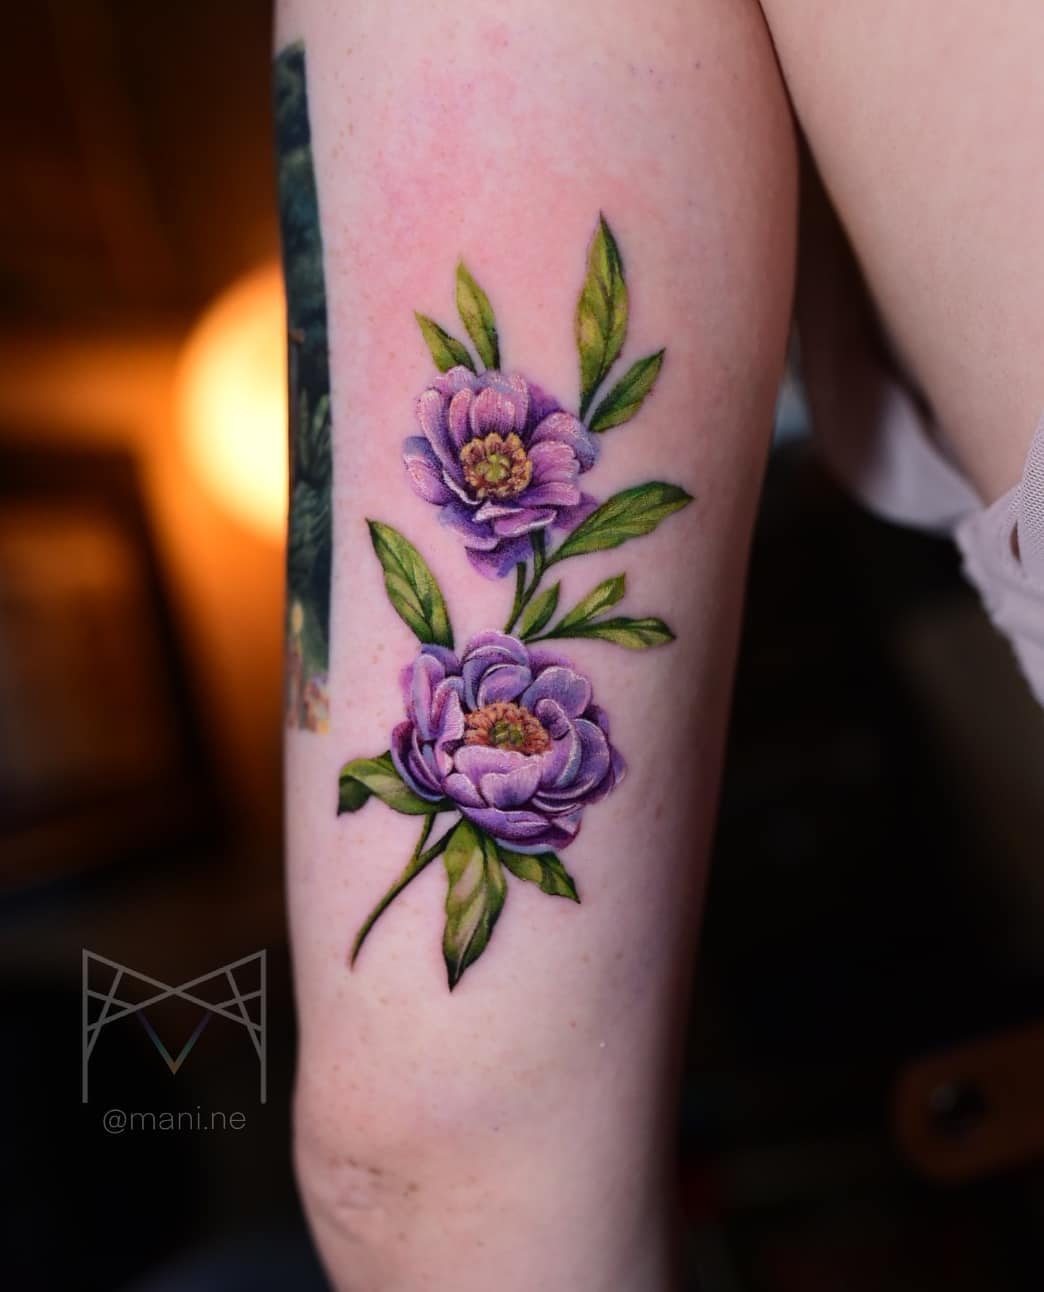 101 Best Small Flower Tattoo Ideas You Have To See To Believe!